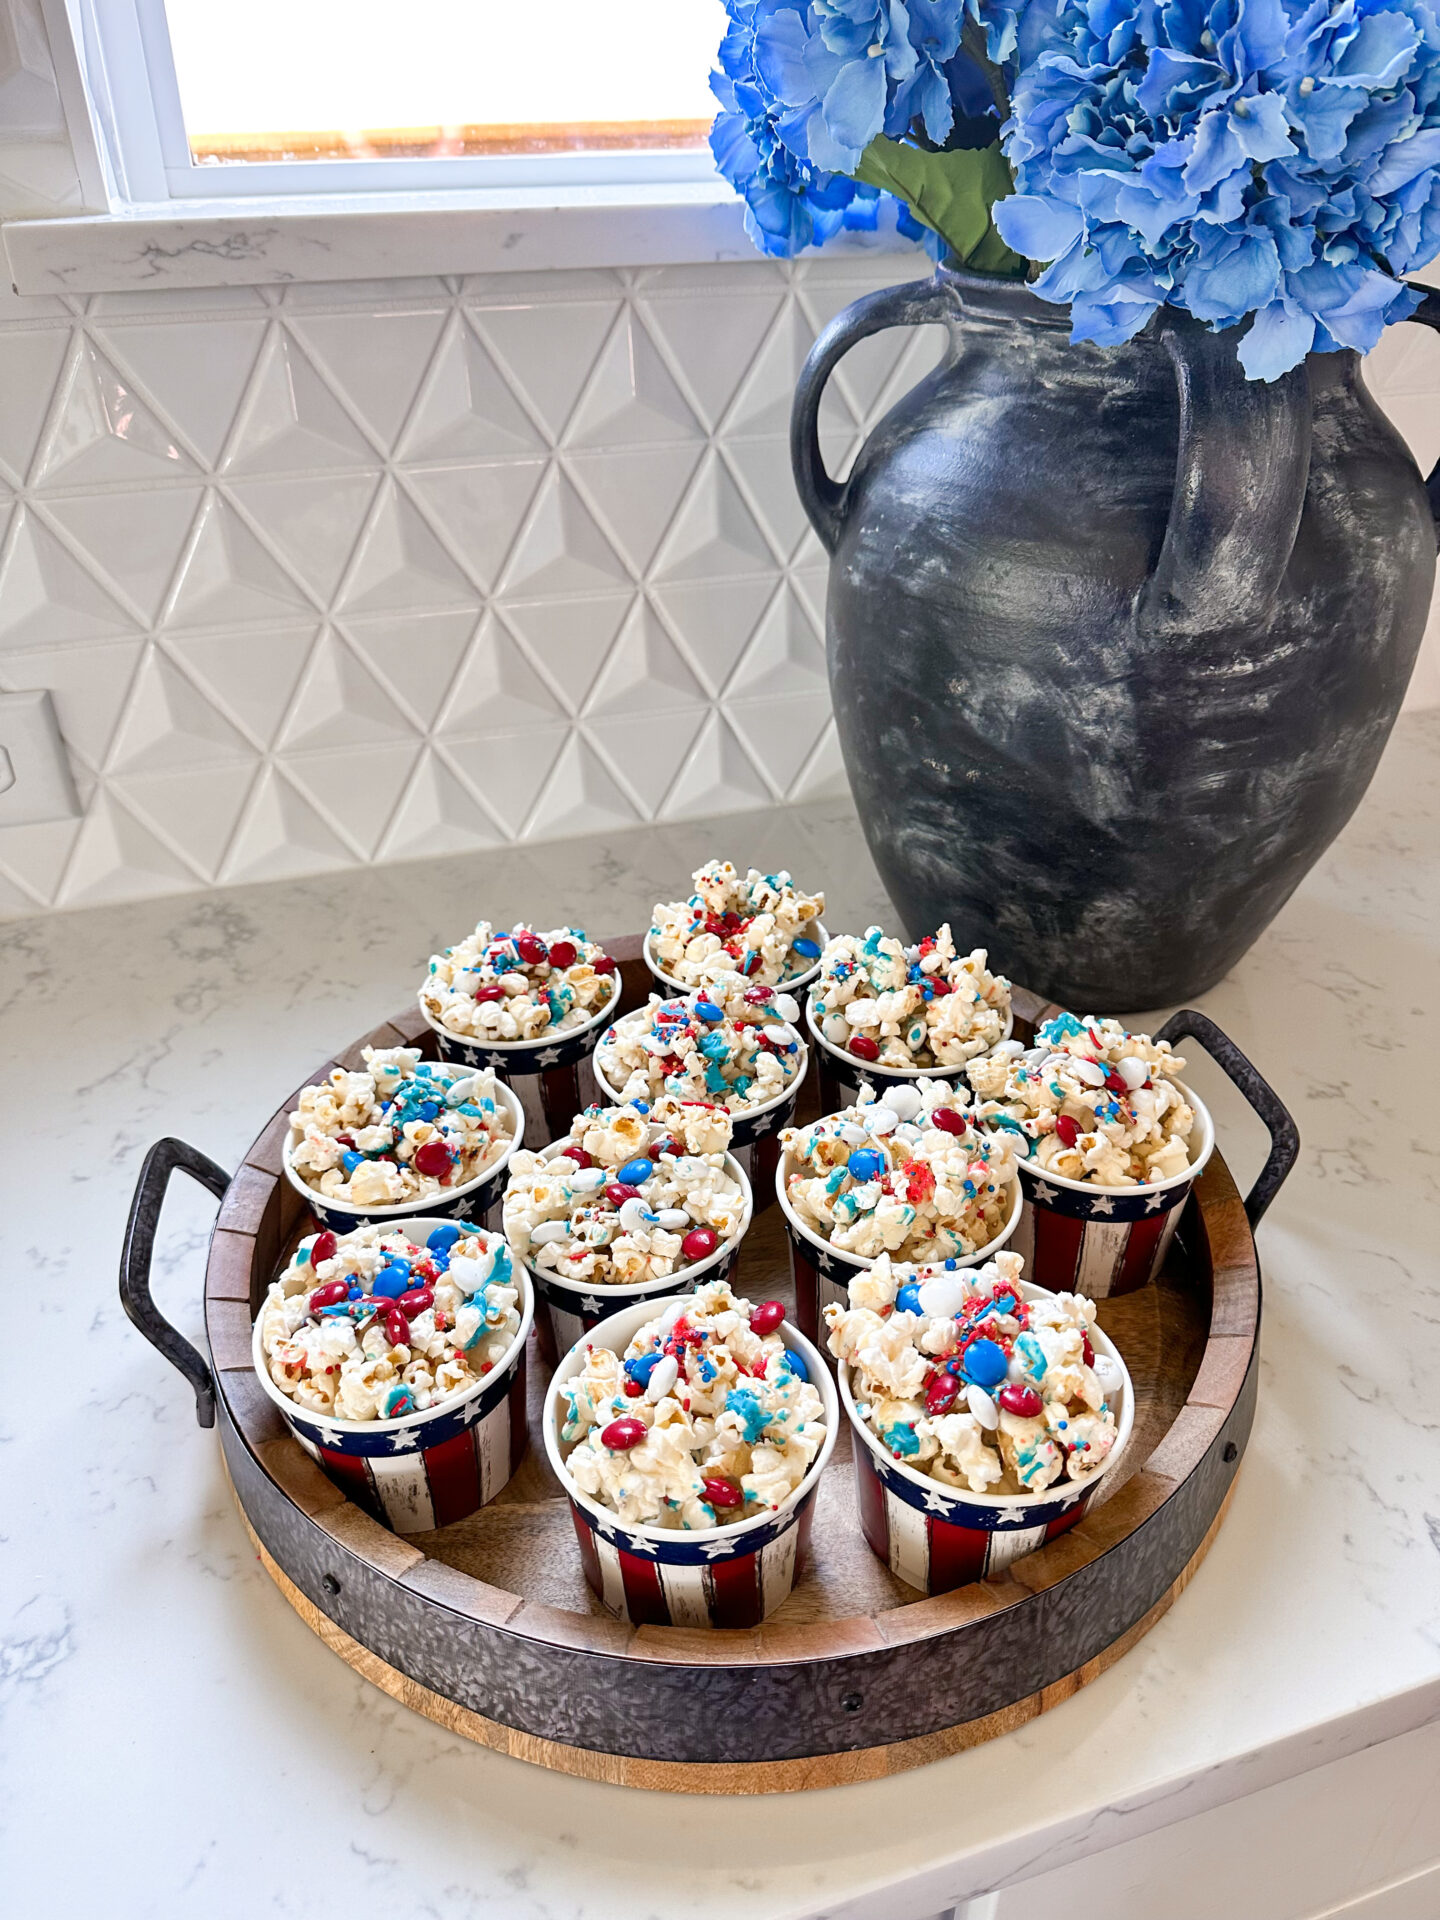 firecracker popcorn, fun fourth of july snack idea | 5 Summer Ideas | Summer Recipes and Decor | summer fun for the family